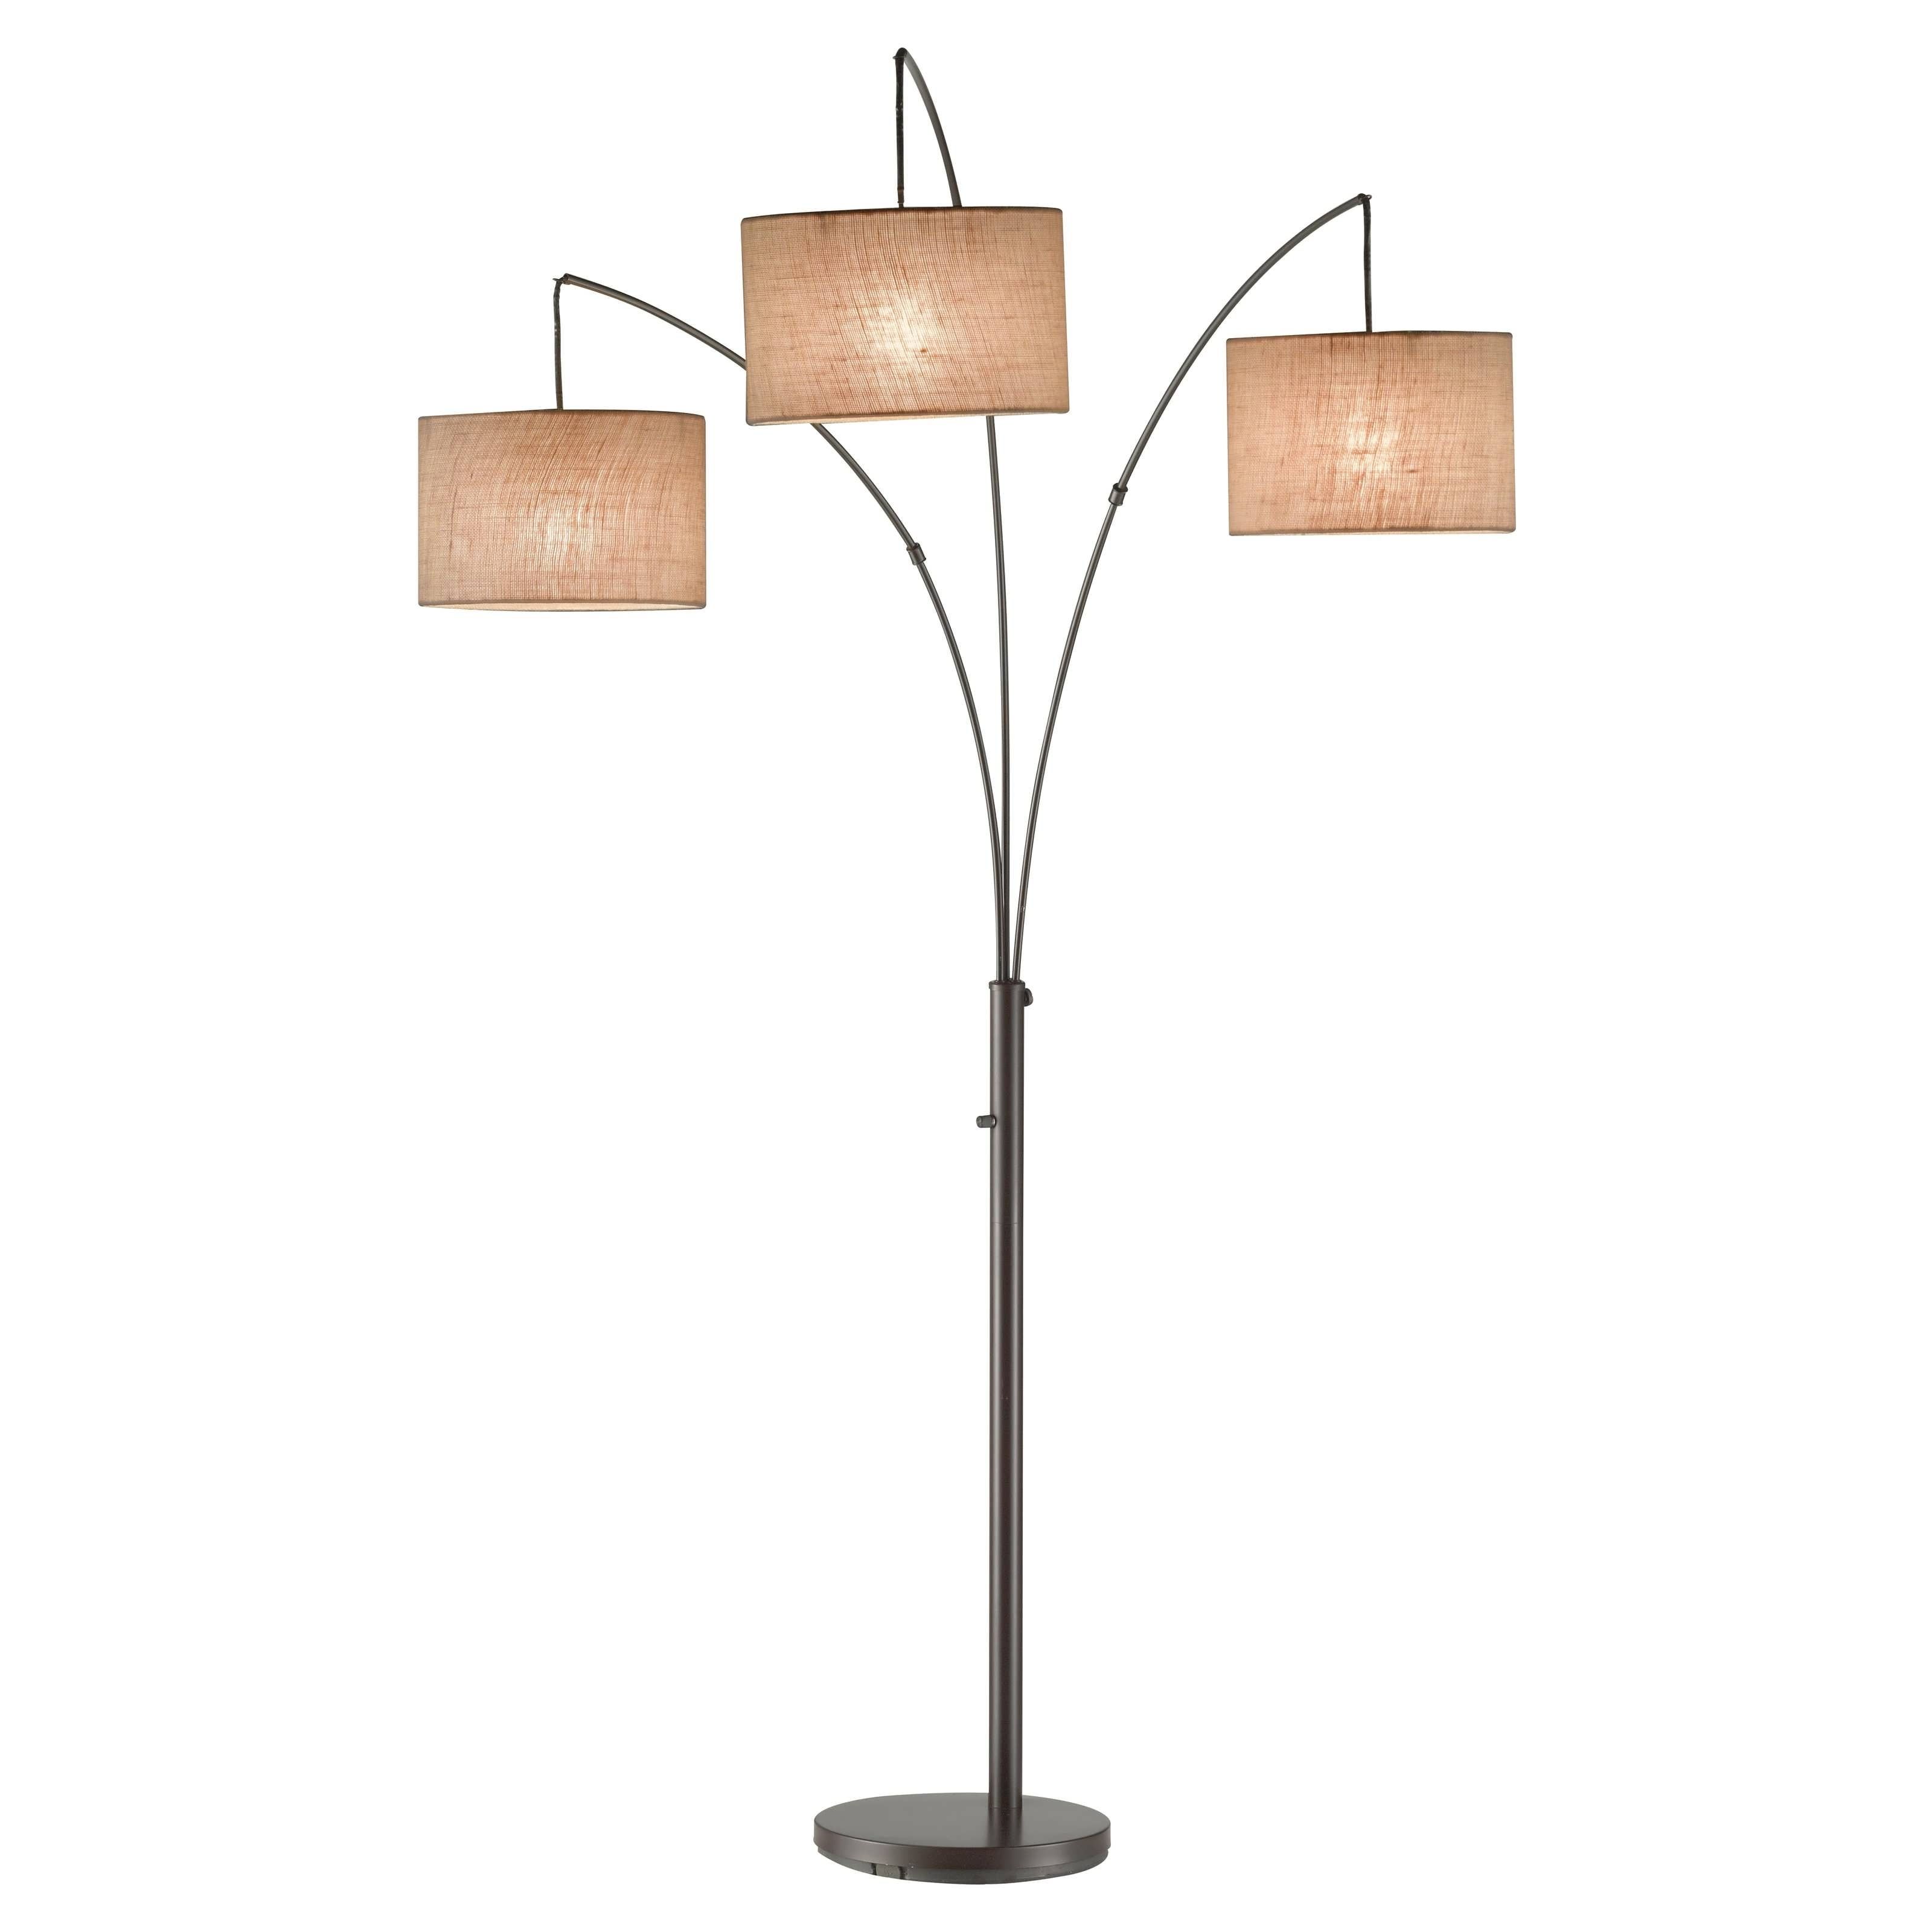 Latest Light : Chandelier Shades Bathroom Chandeliers Led Floor Lamp Intended For Stand Up Chandeliers (View 18 of 20)